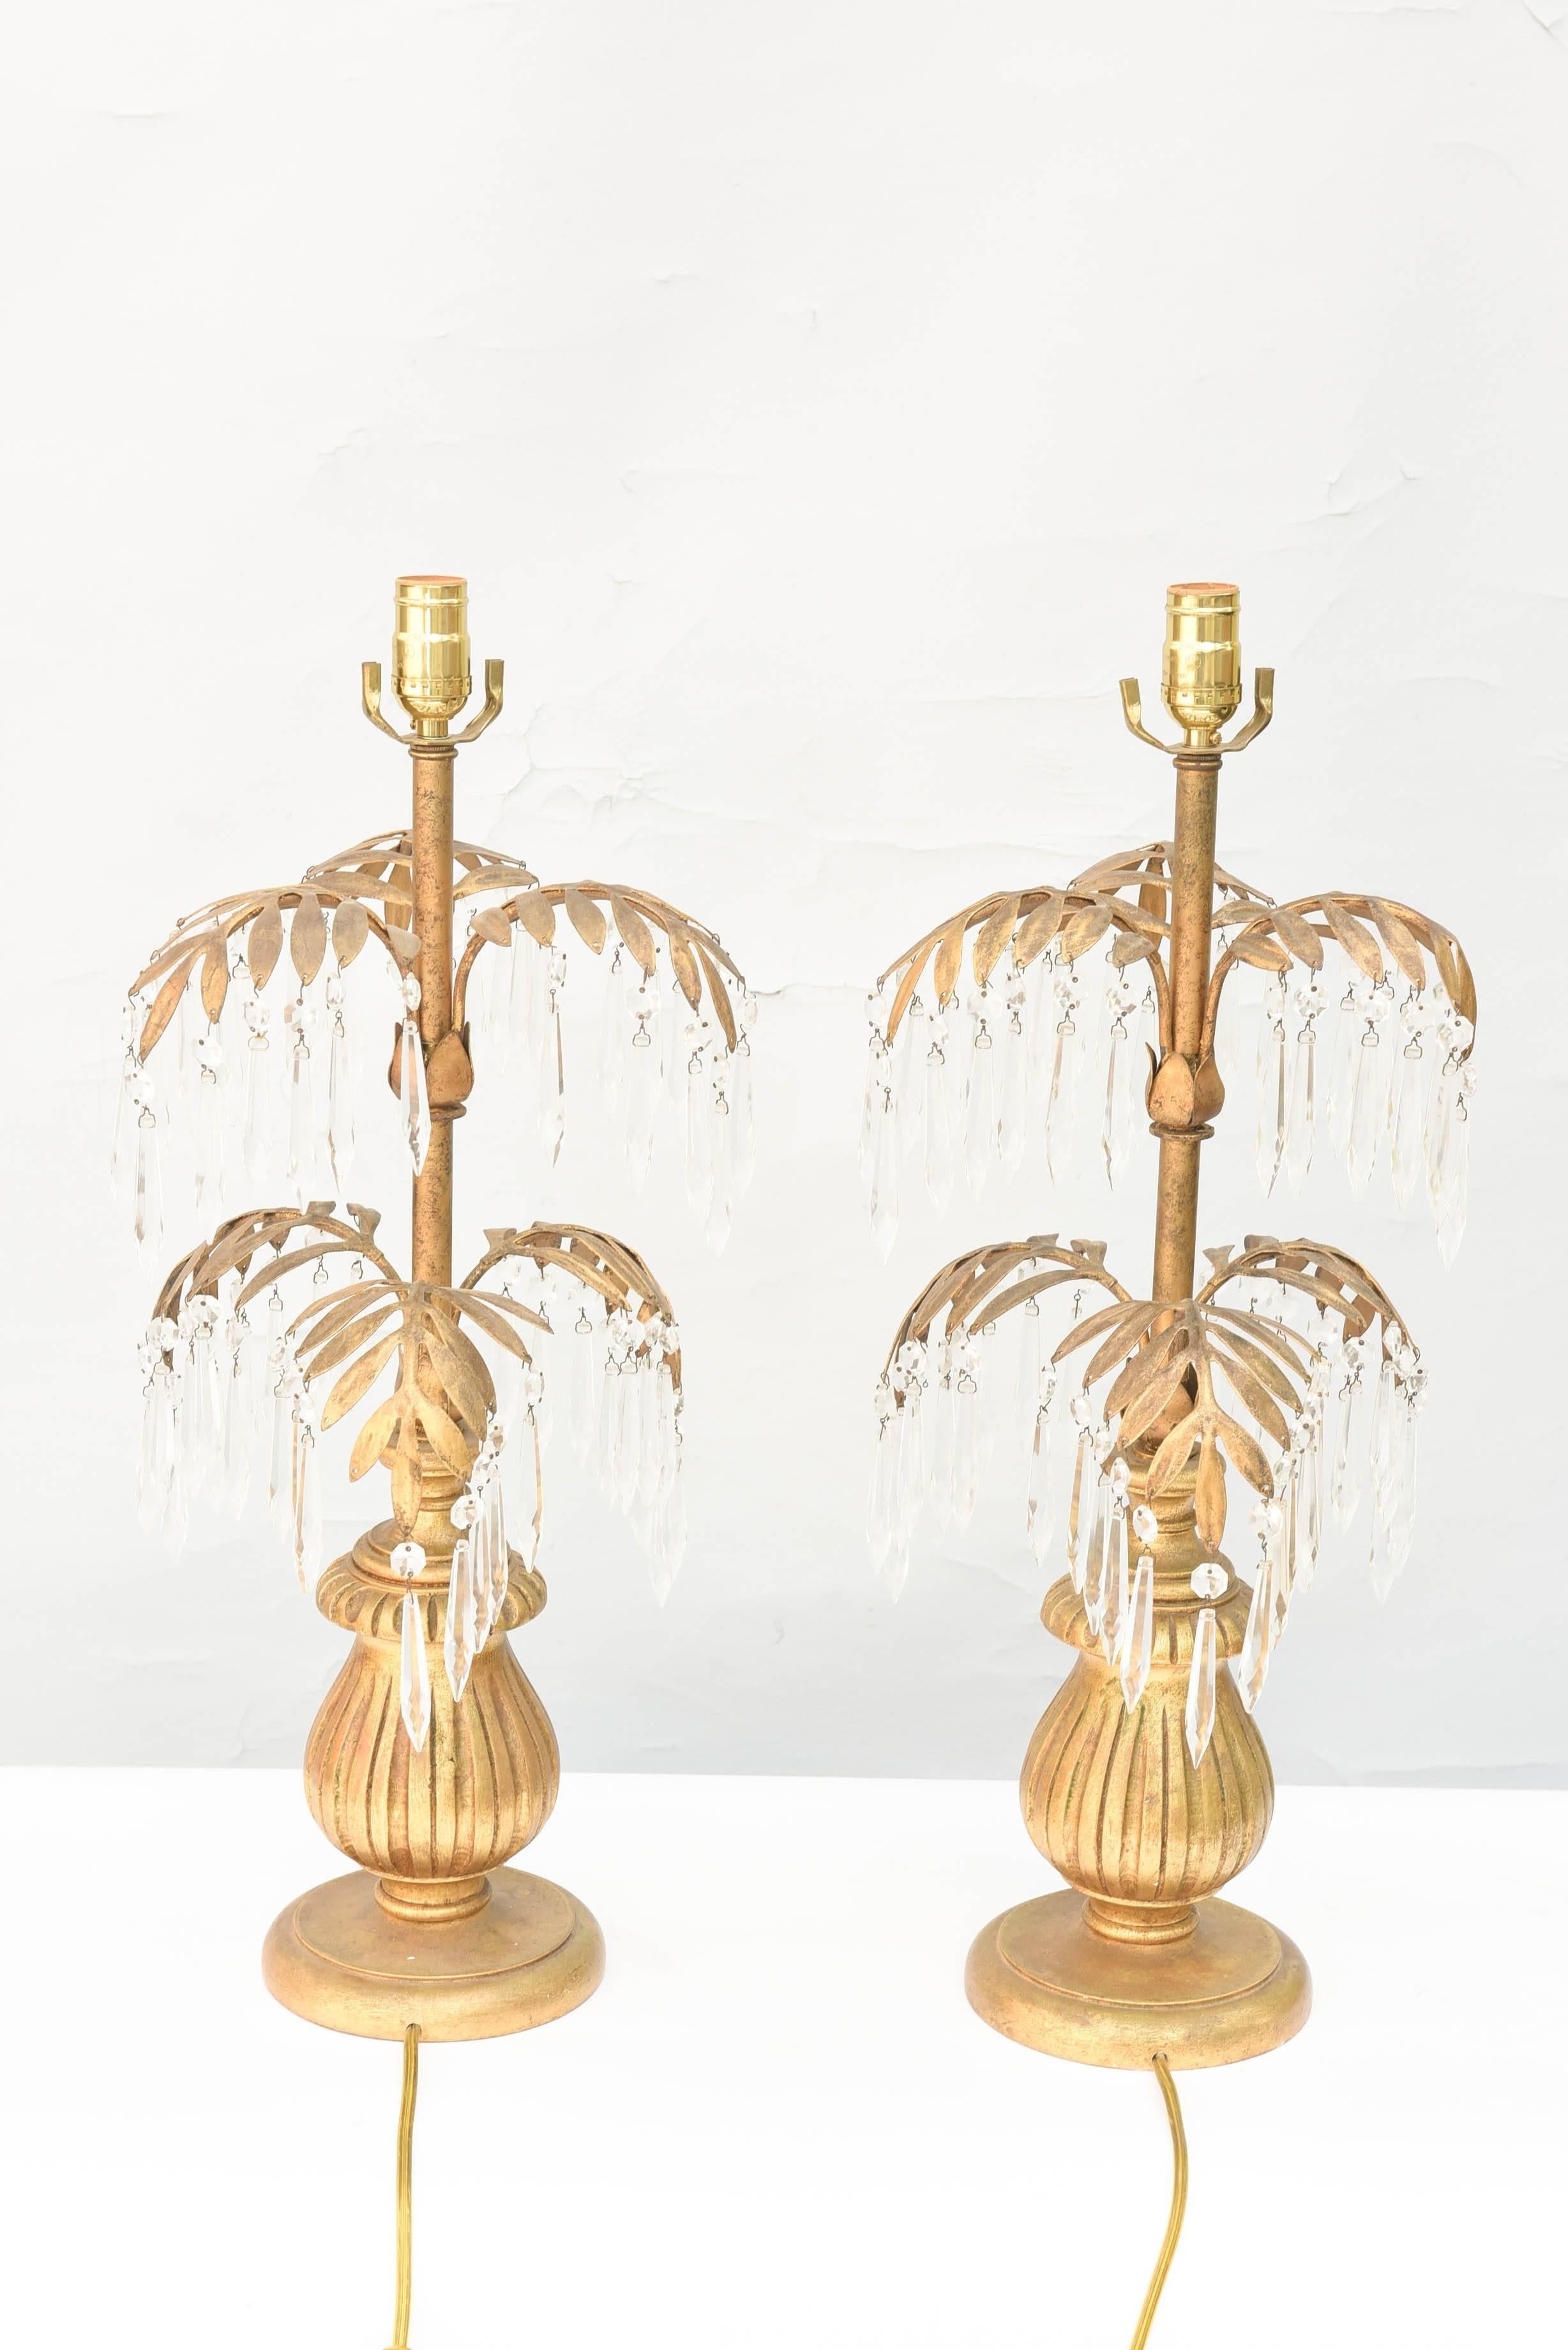 Pair of Gilt Metal Palm Lamps Decorated with Crystals 2